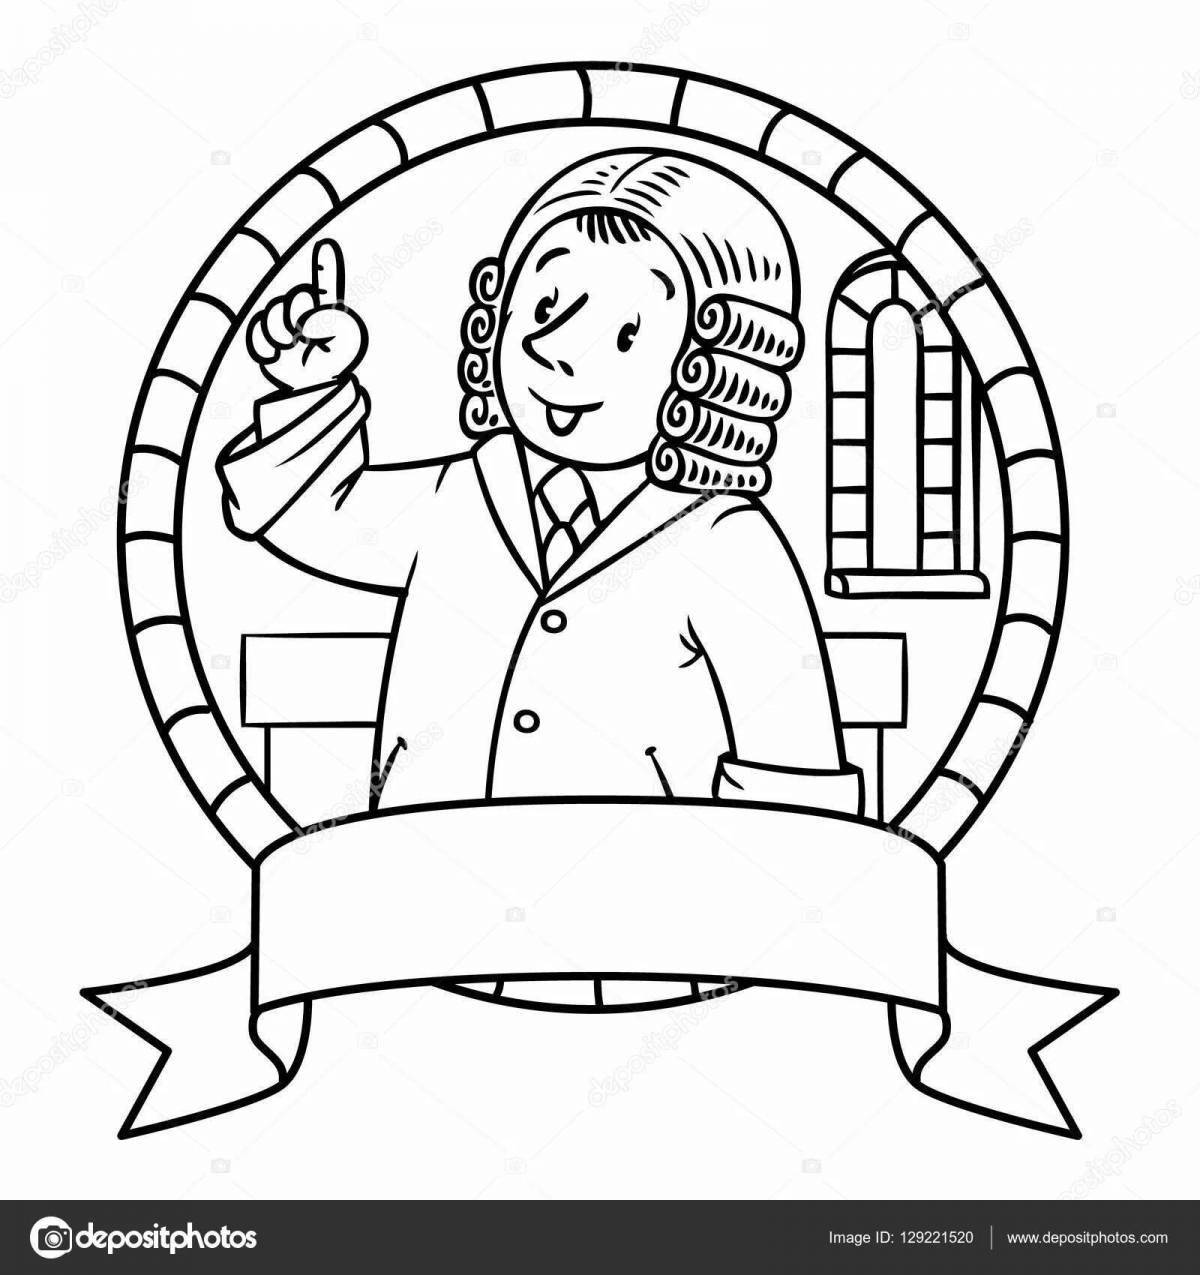 Colorful lawyer coloring page